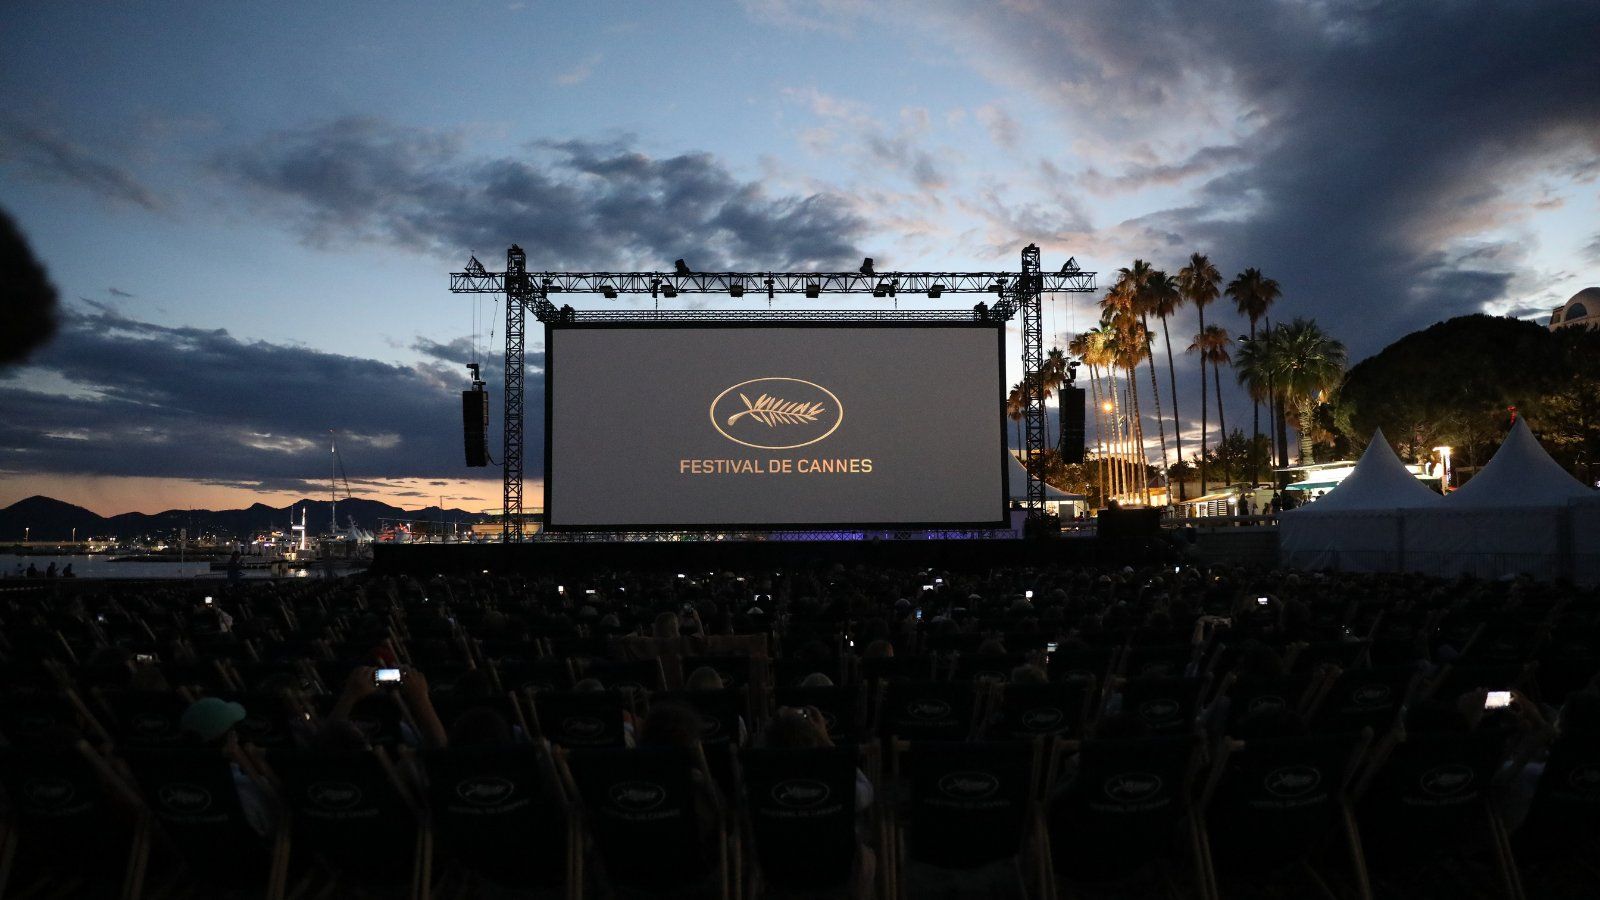 Cannes Film Festival: History and significance